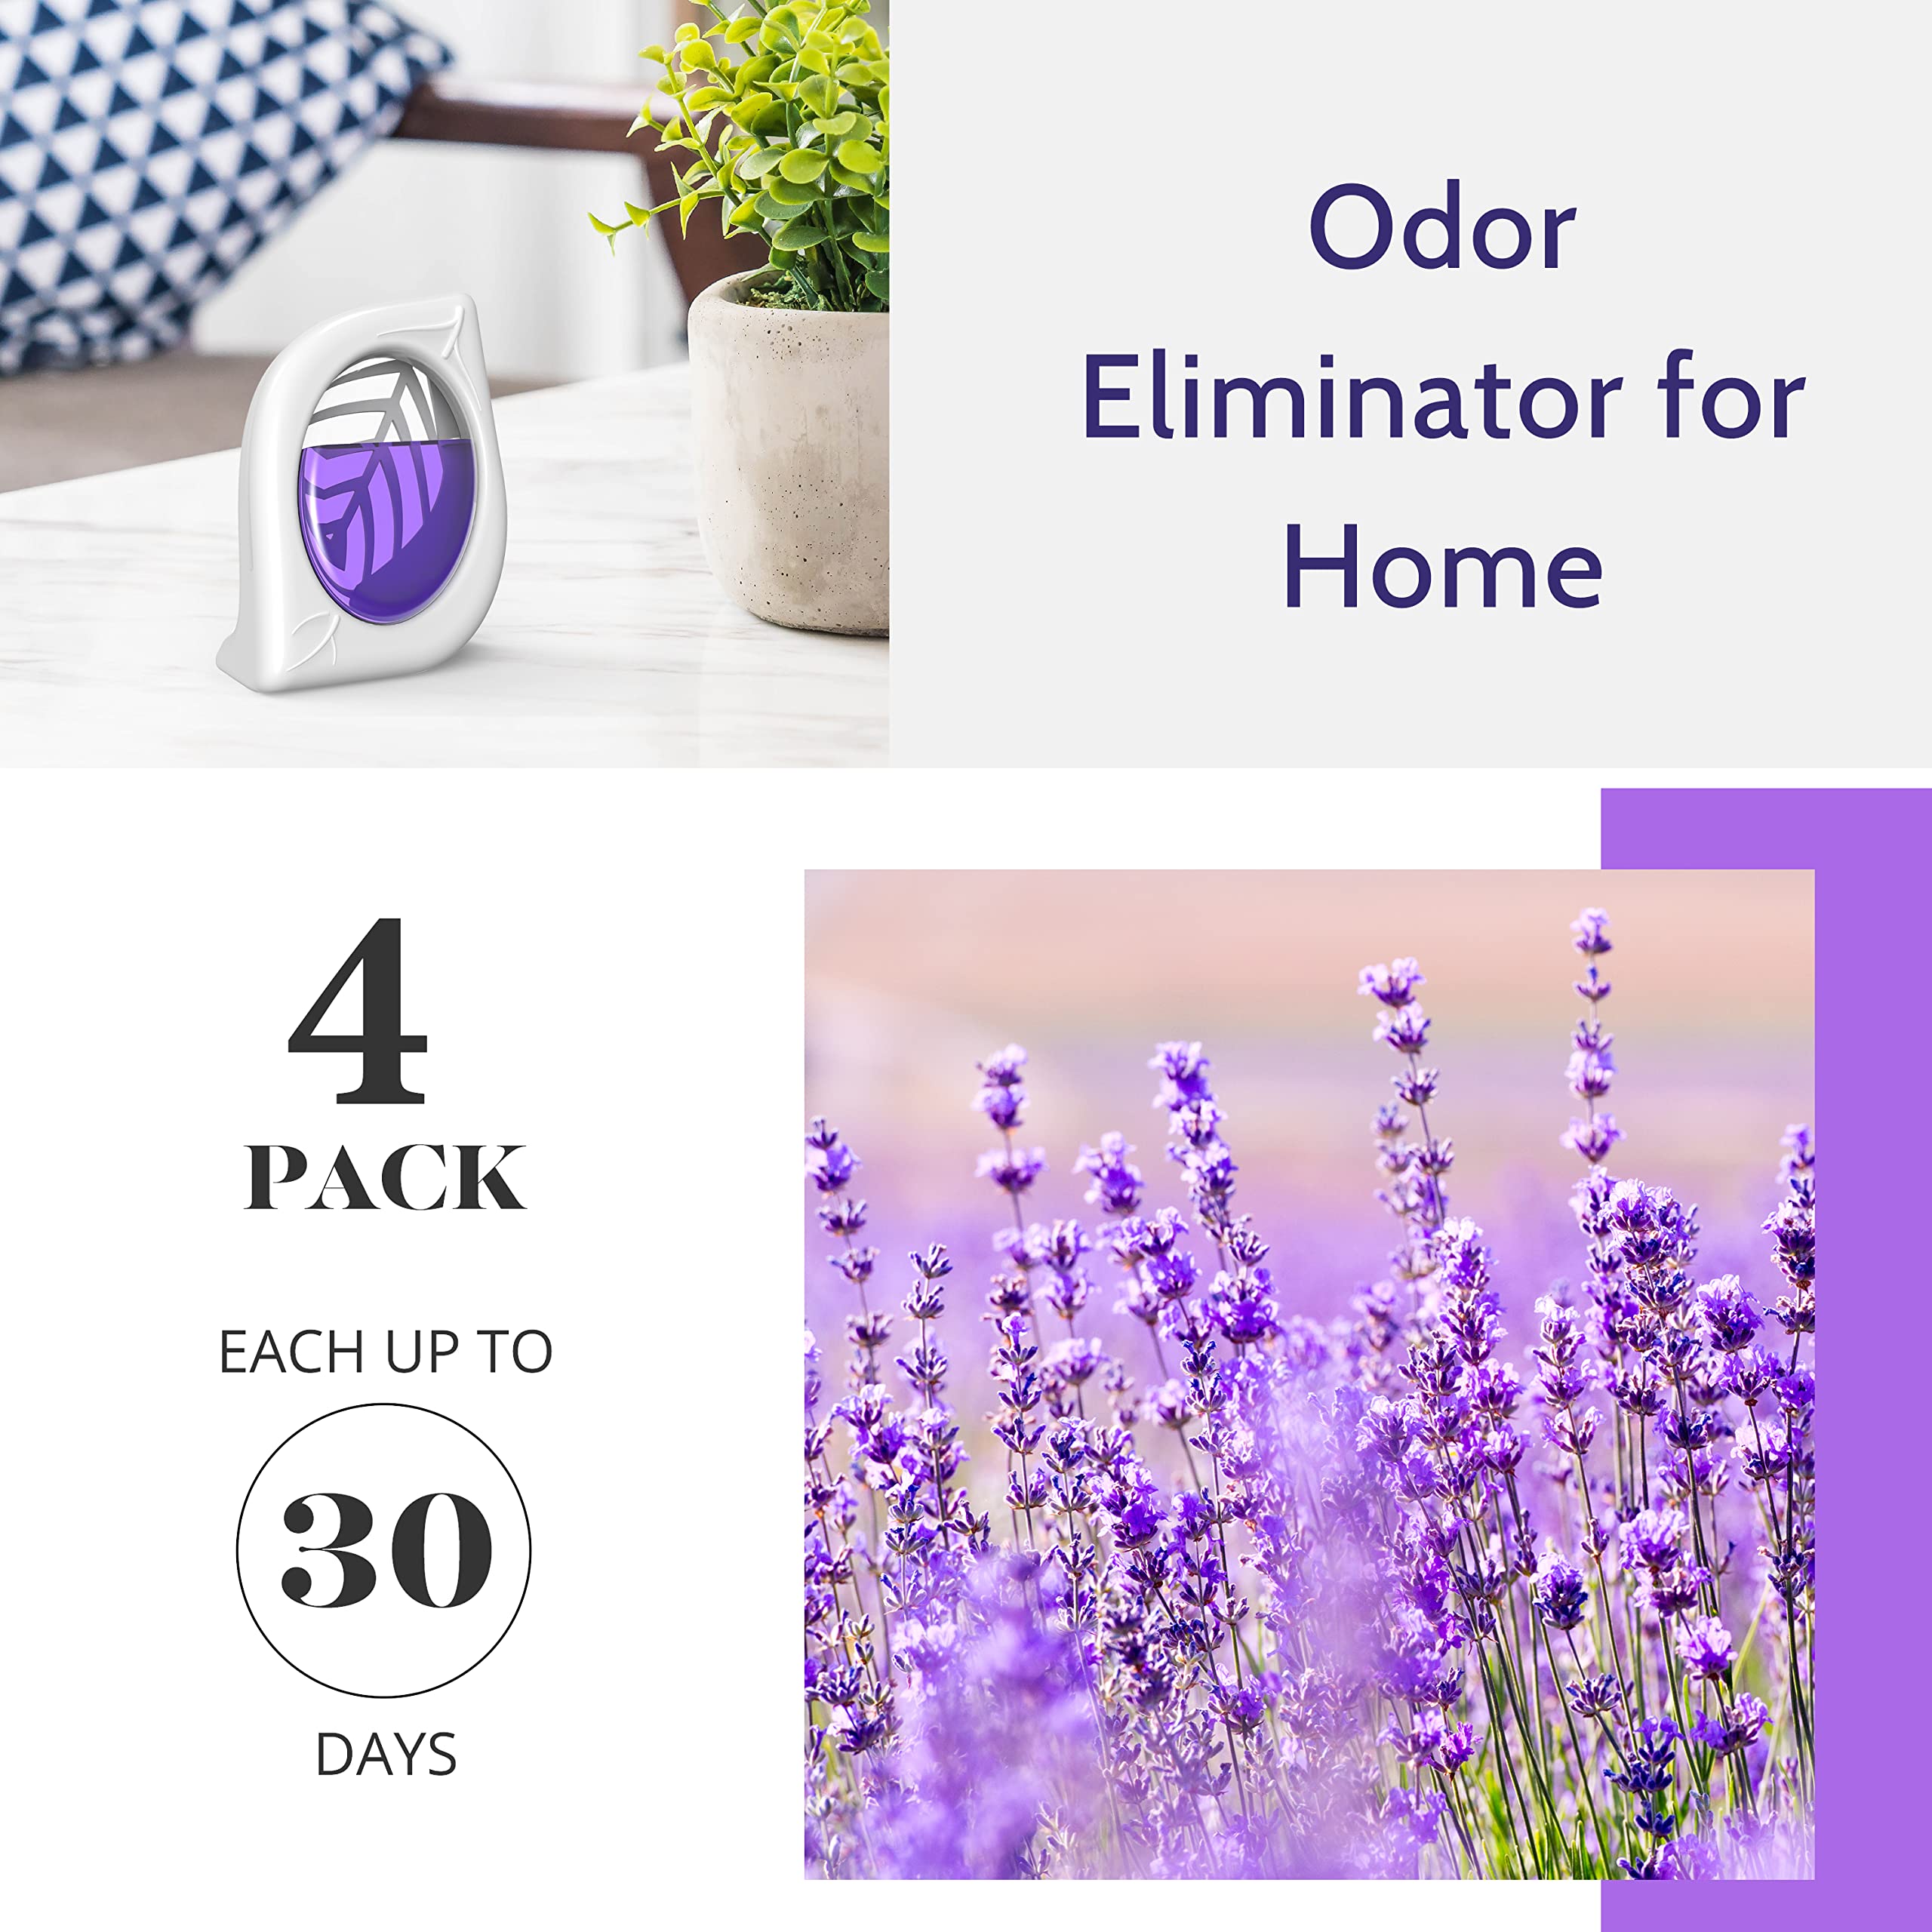 Air Freshener for Home, 4 Pack, Lavender Essential oils, Odor Eliminator for Small Area Closets Bathroom Pets Strong Odor, Up to 120 Days